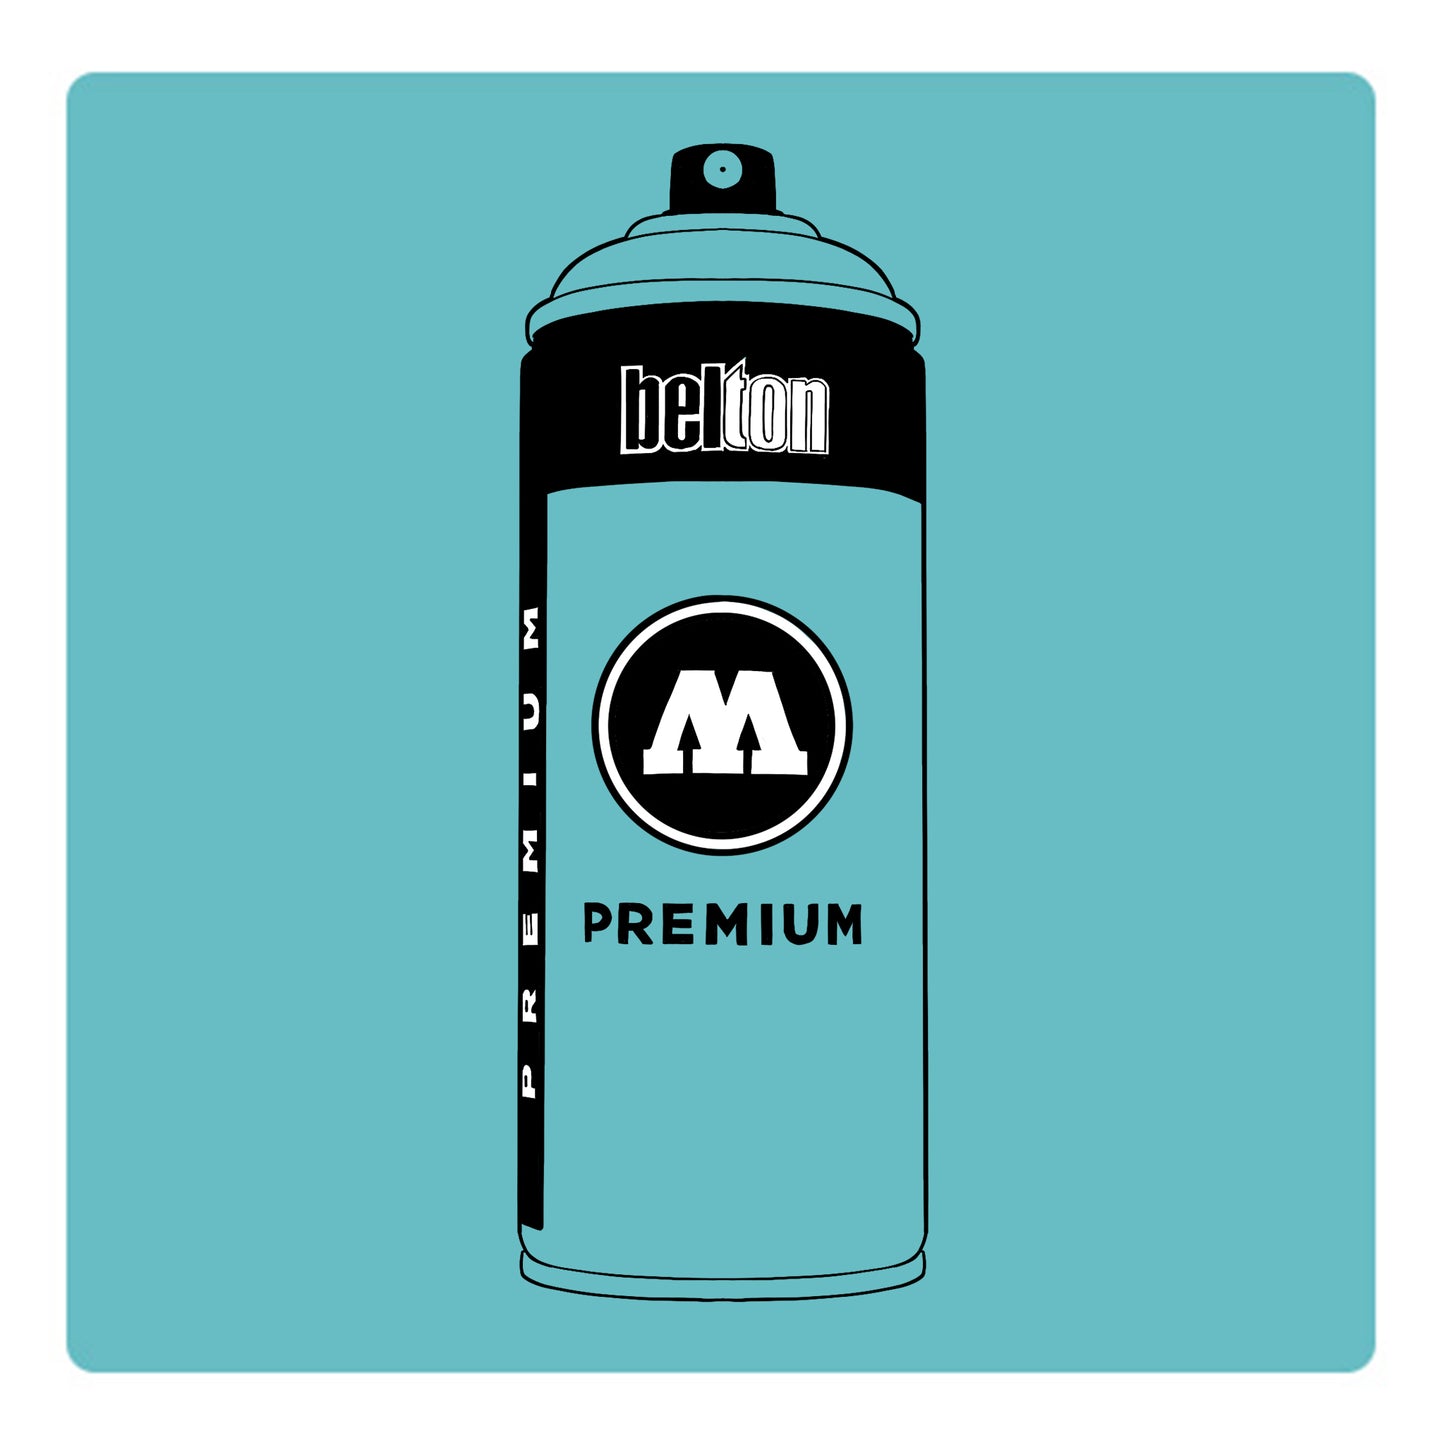 A black outline drawing of a sky blue spray paint can with the words "belton","premium" and the letter"M" written on the face in black and white font. The background is a color swatch of the same sky blue with a white border.